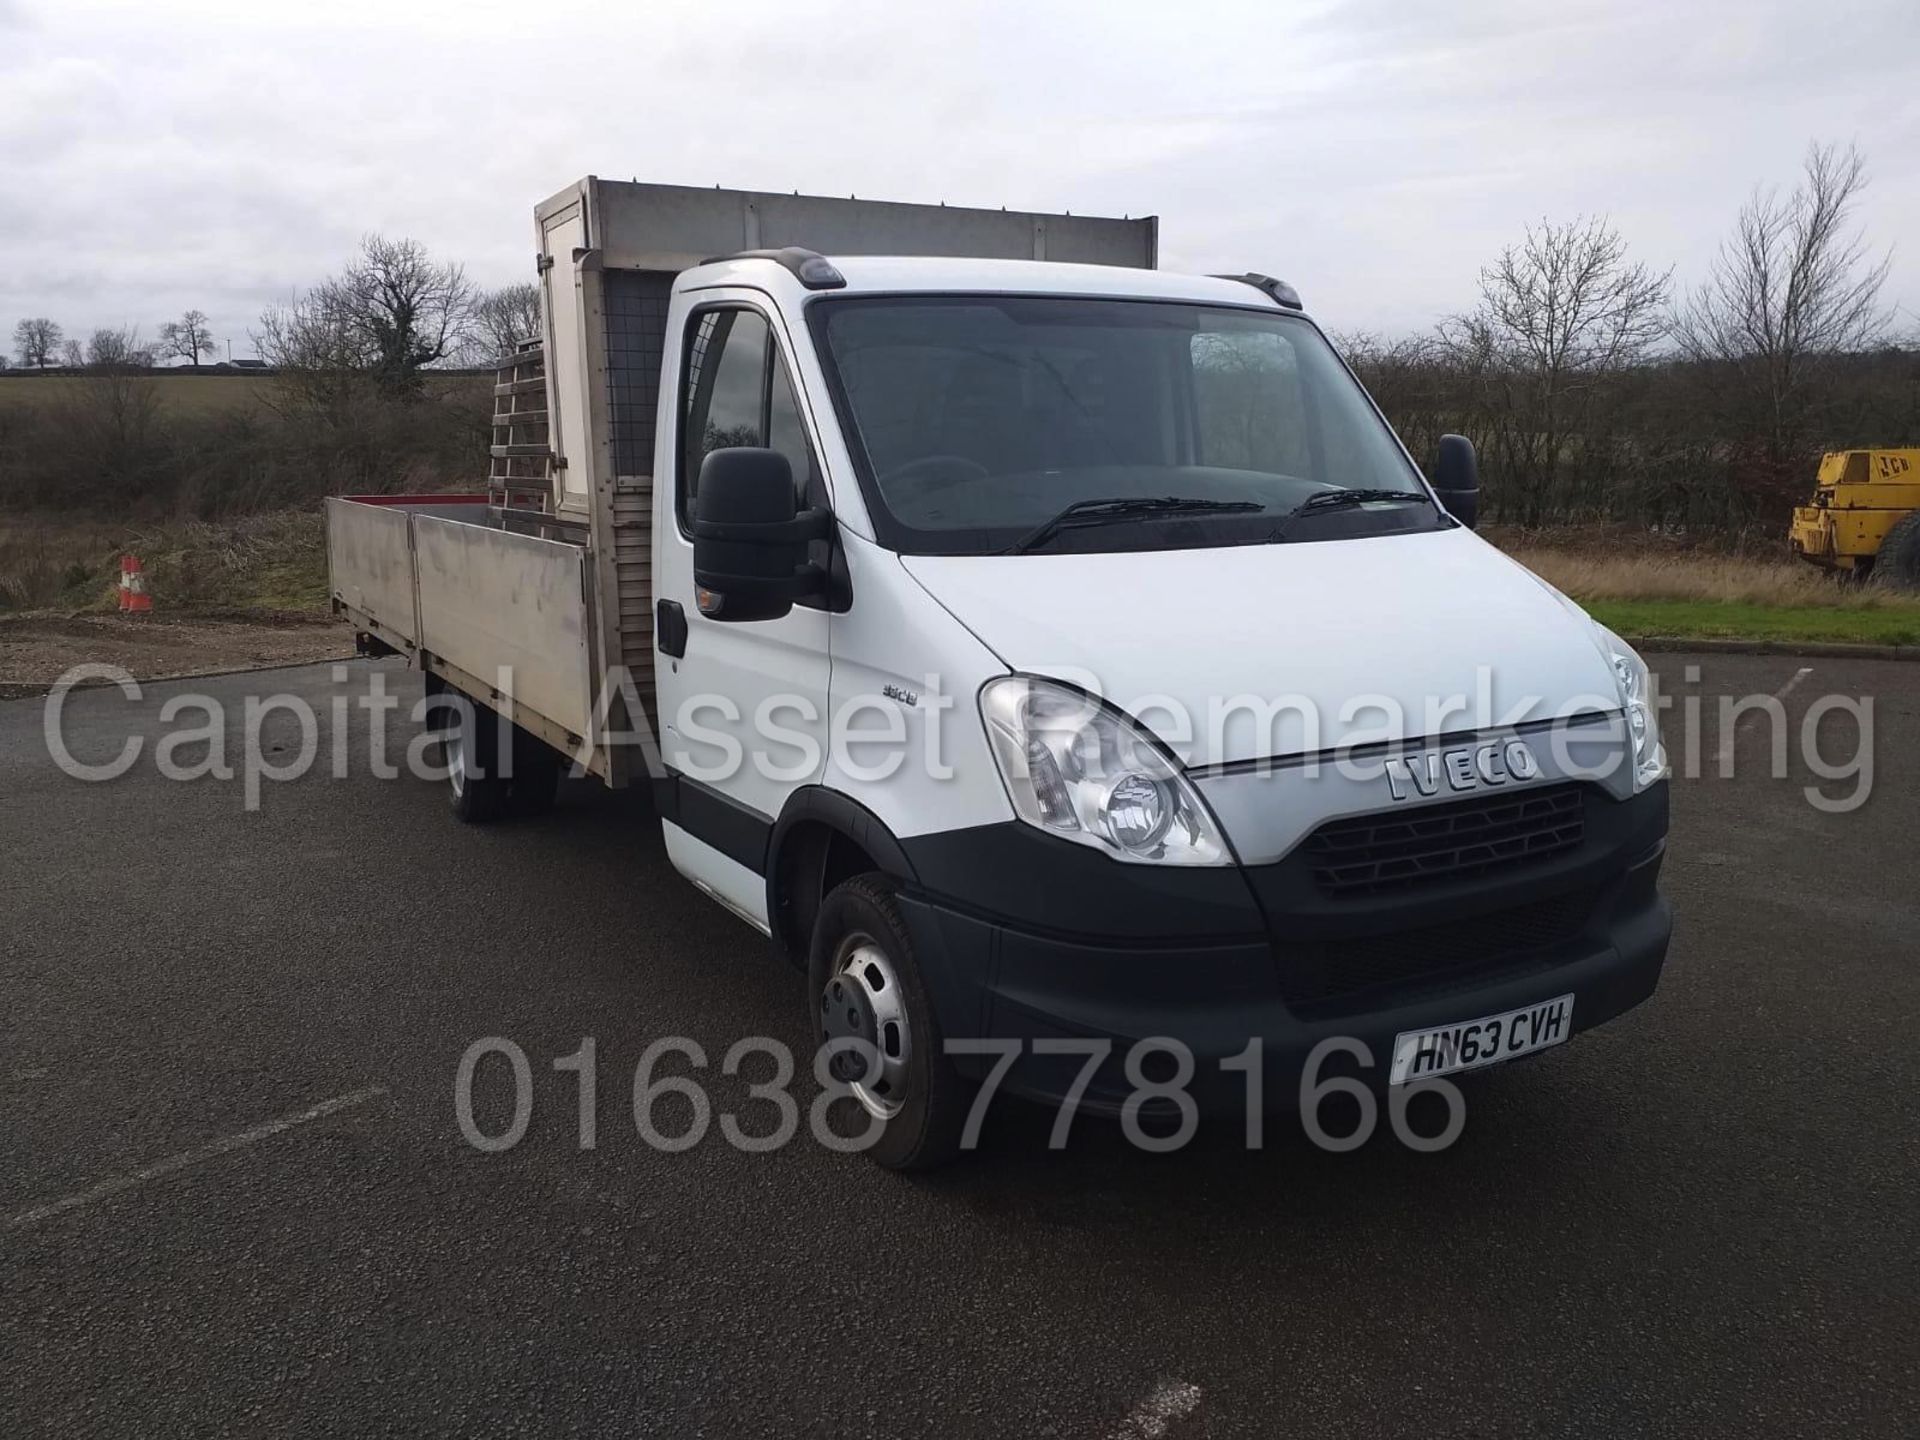 IVECO DAILY 35C13 *XLWB - ALLOY DROPSIDE* (2014 MODEL) '2.3 DIESEL - 127 BHP - AUTOMATIC' (3500 KG) - Image 3 of 20